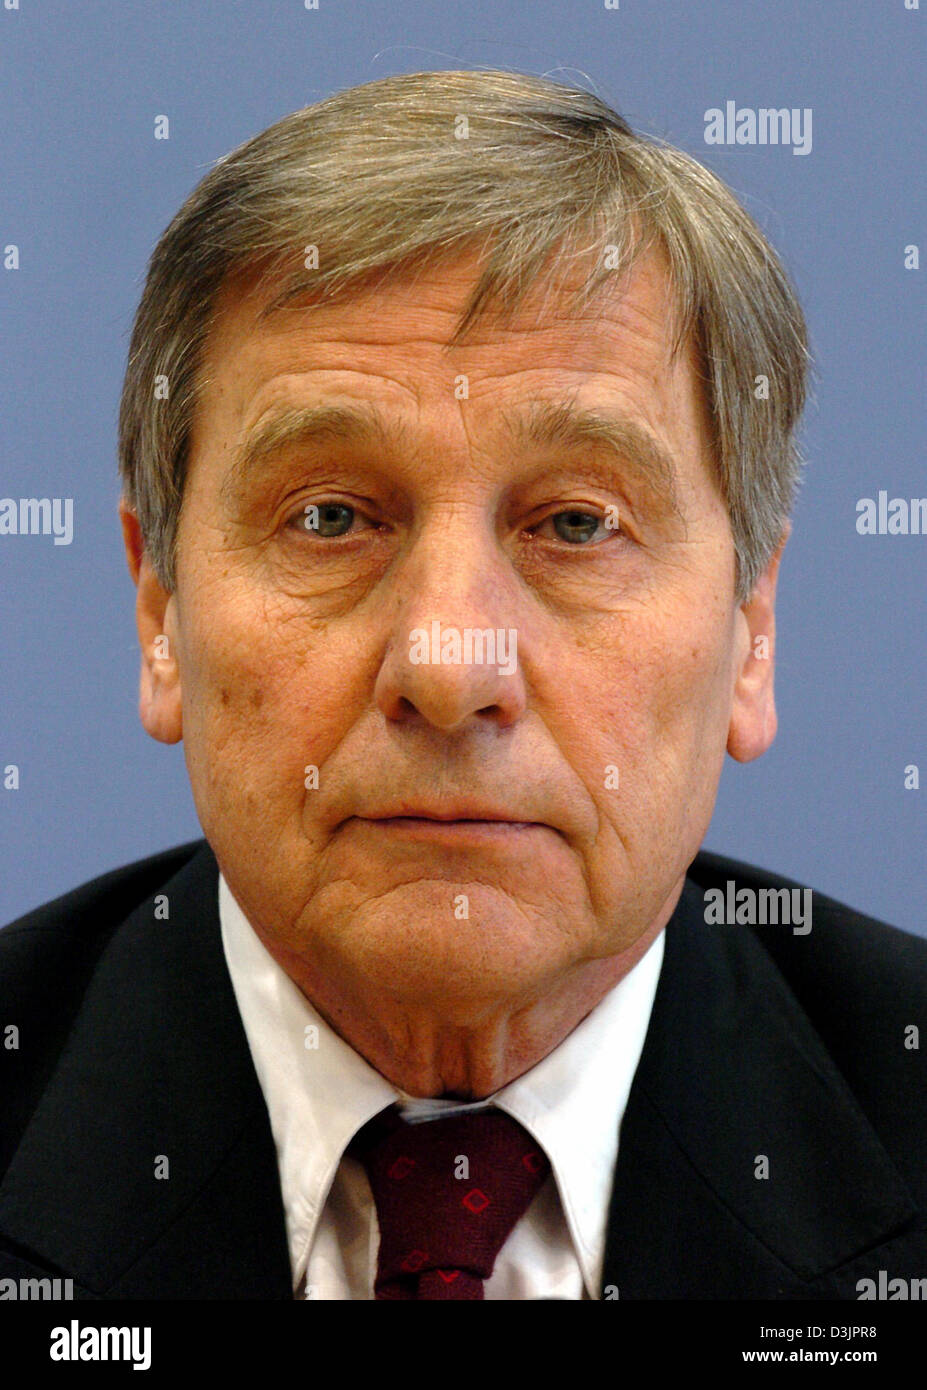 (dpa) - German Minister for Economic Affairs Wolgang Clement in a picture taken during a press conference in Berlin, Germany, 2 February 2005. Stock Photo